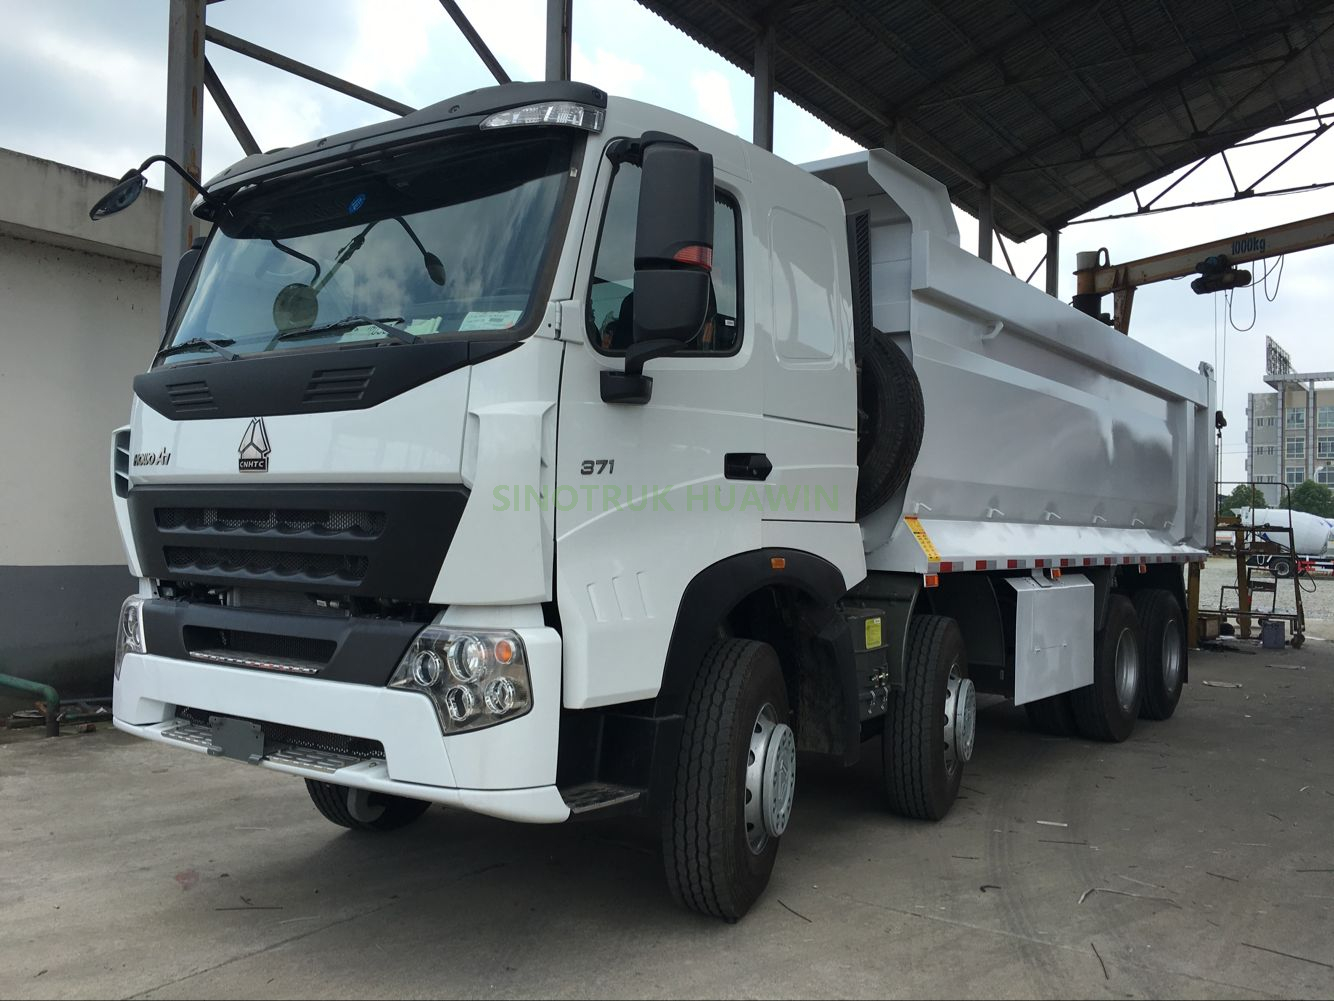 SINOTRUK A7 8X4 Front Tipping Dump Truck for Africa